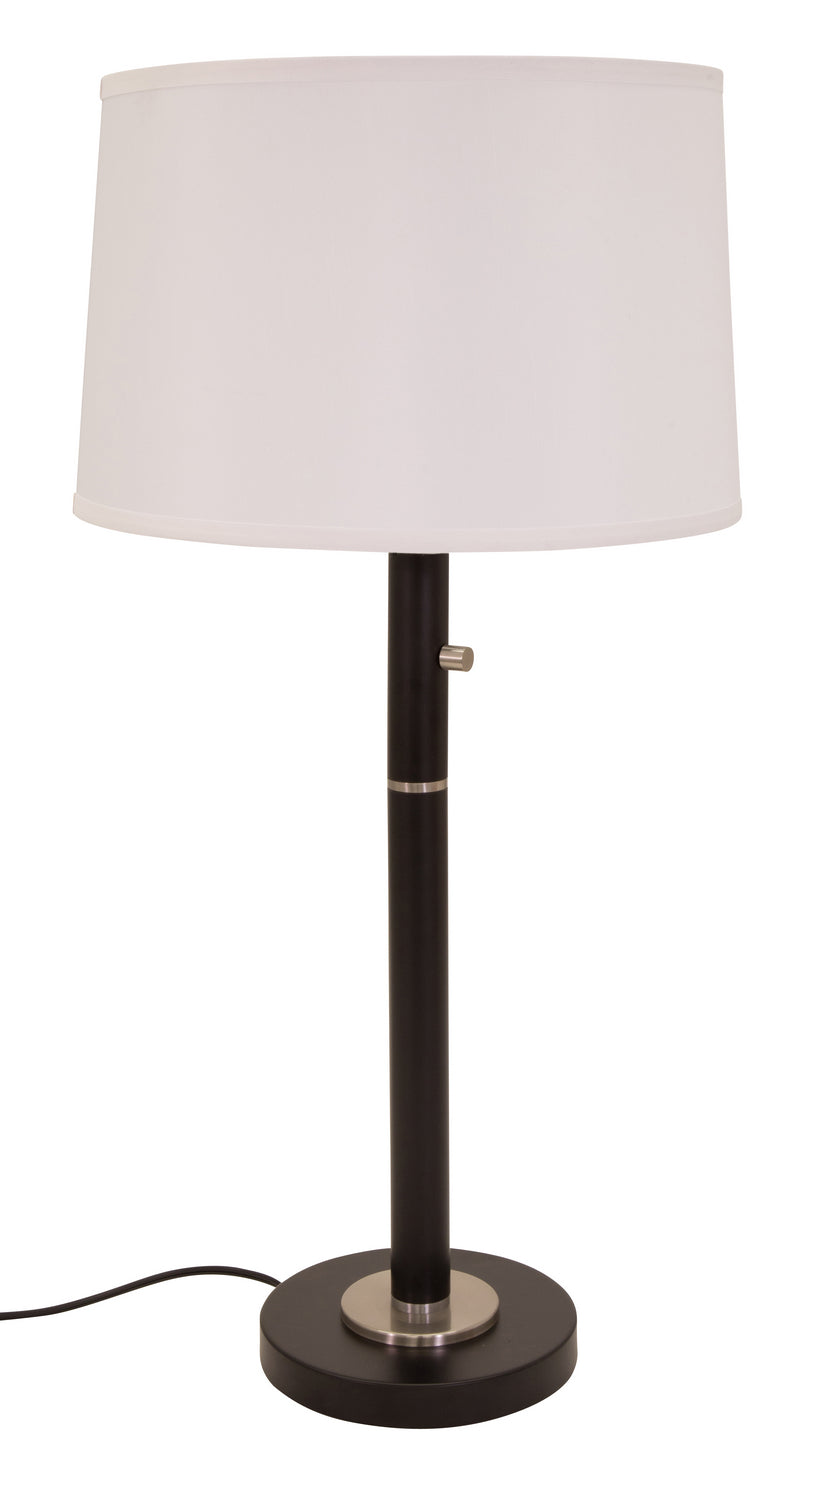 Rupert Three Way Table Lamp In Granite With Satin Nickel Accents And Usb Port with White Linen Hardback